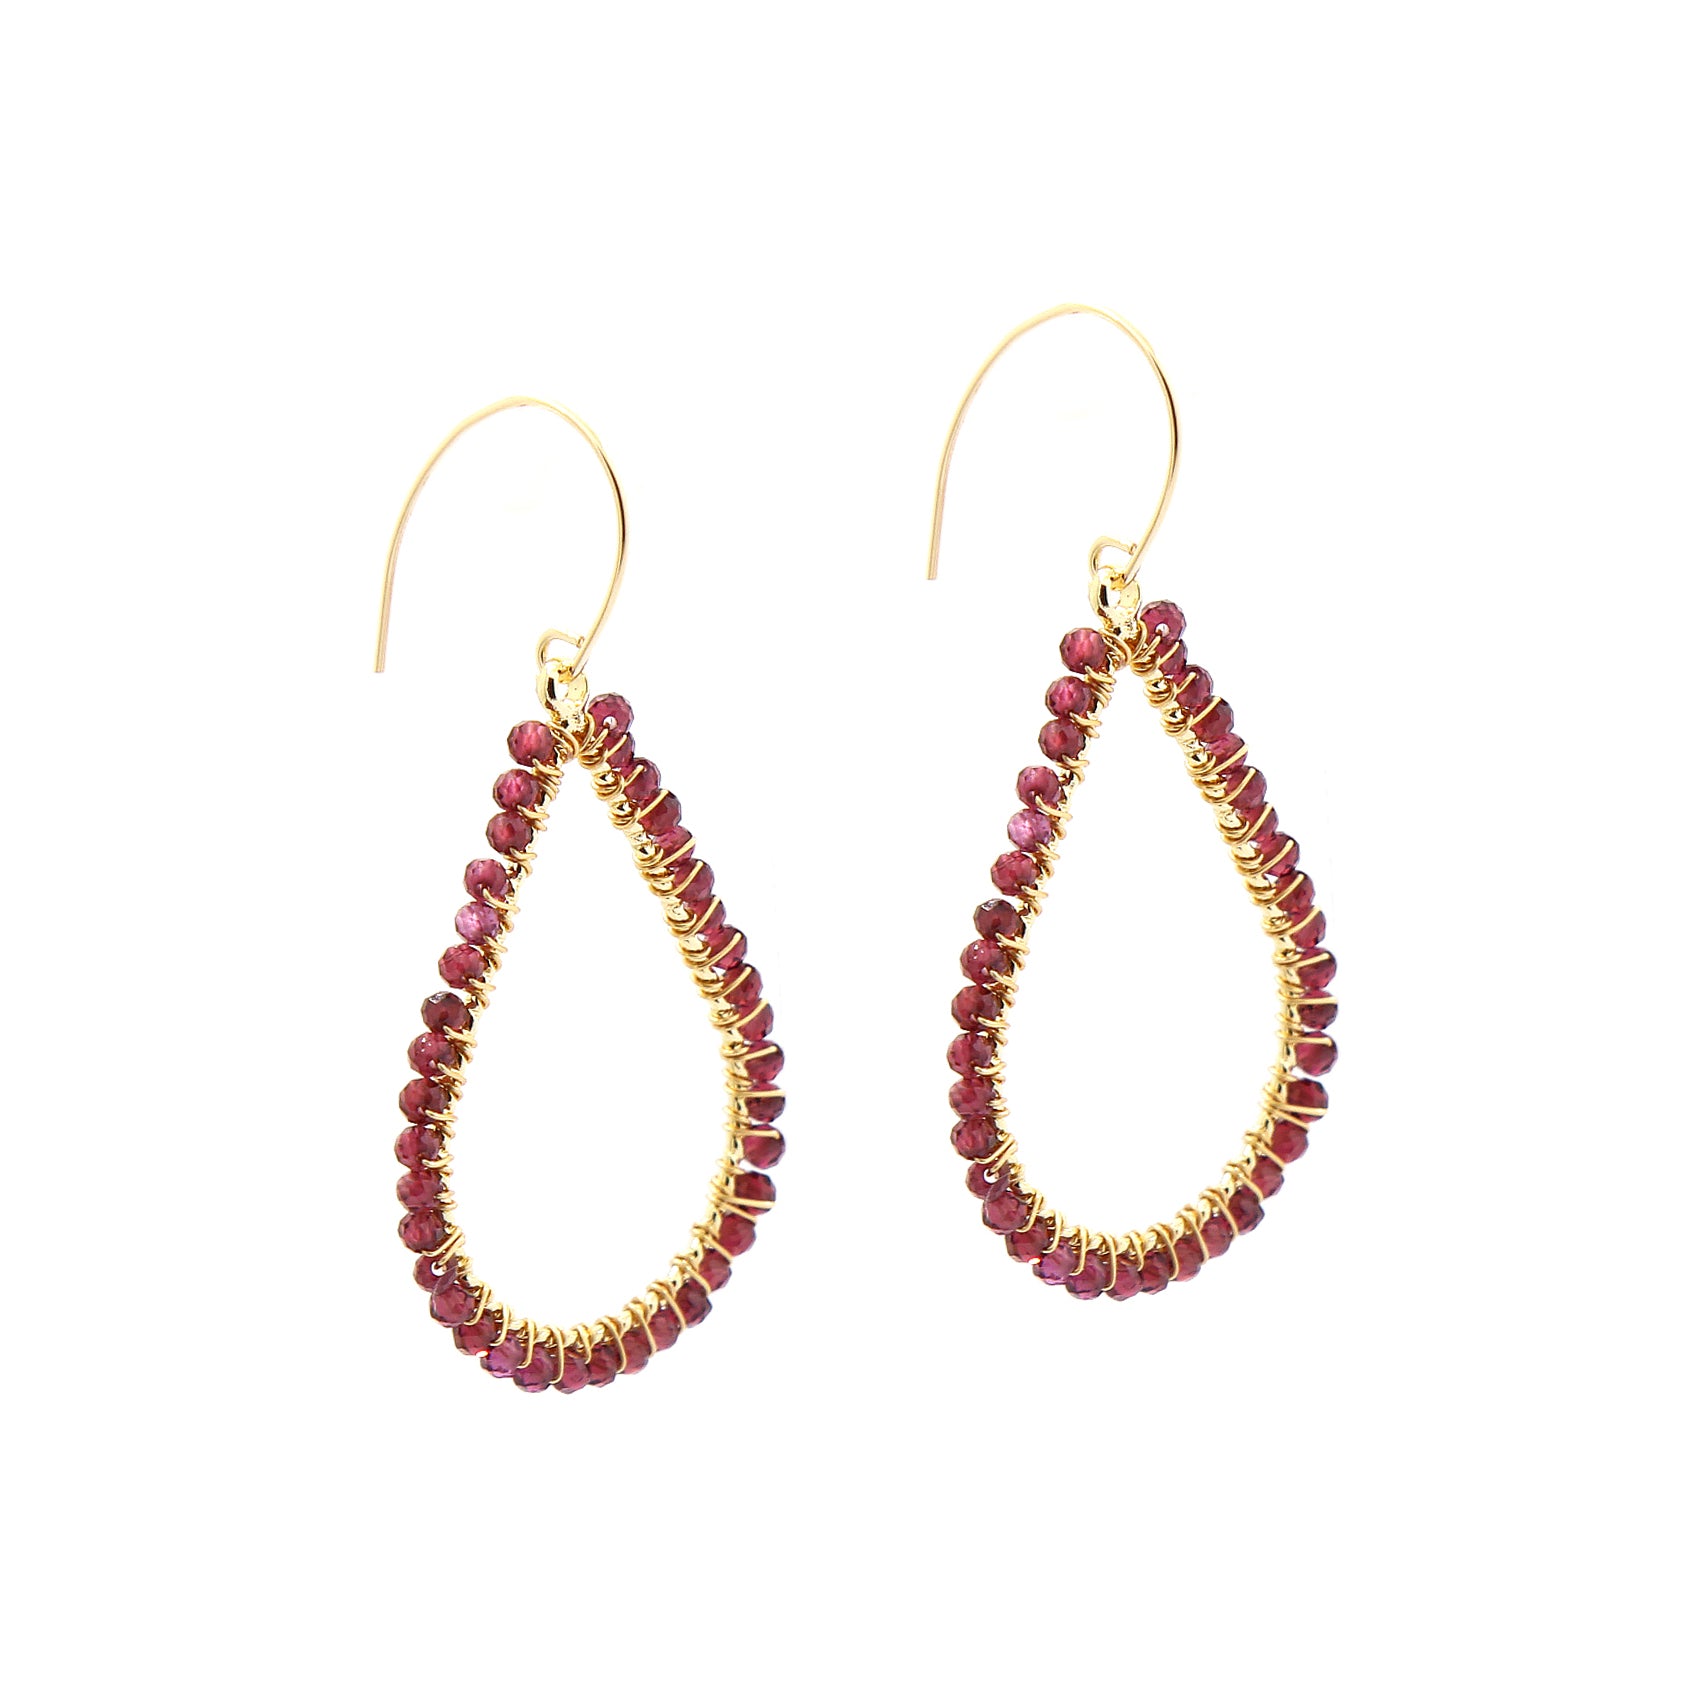 Find Your Perfect Chiyo Drop Earrings